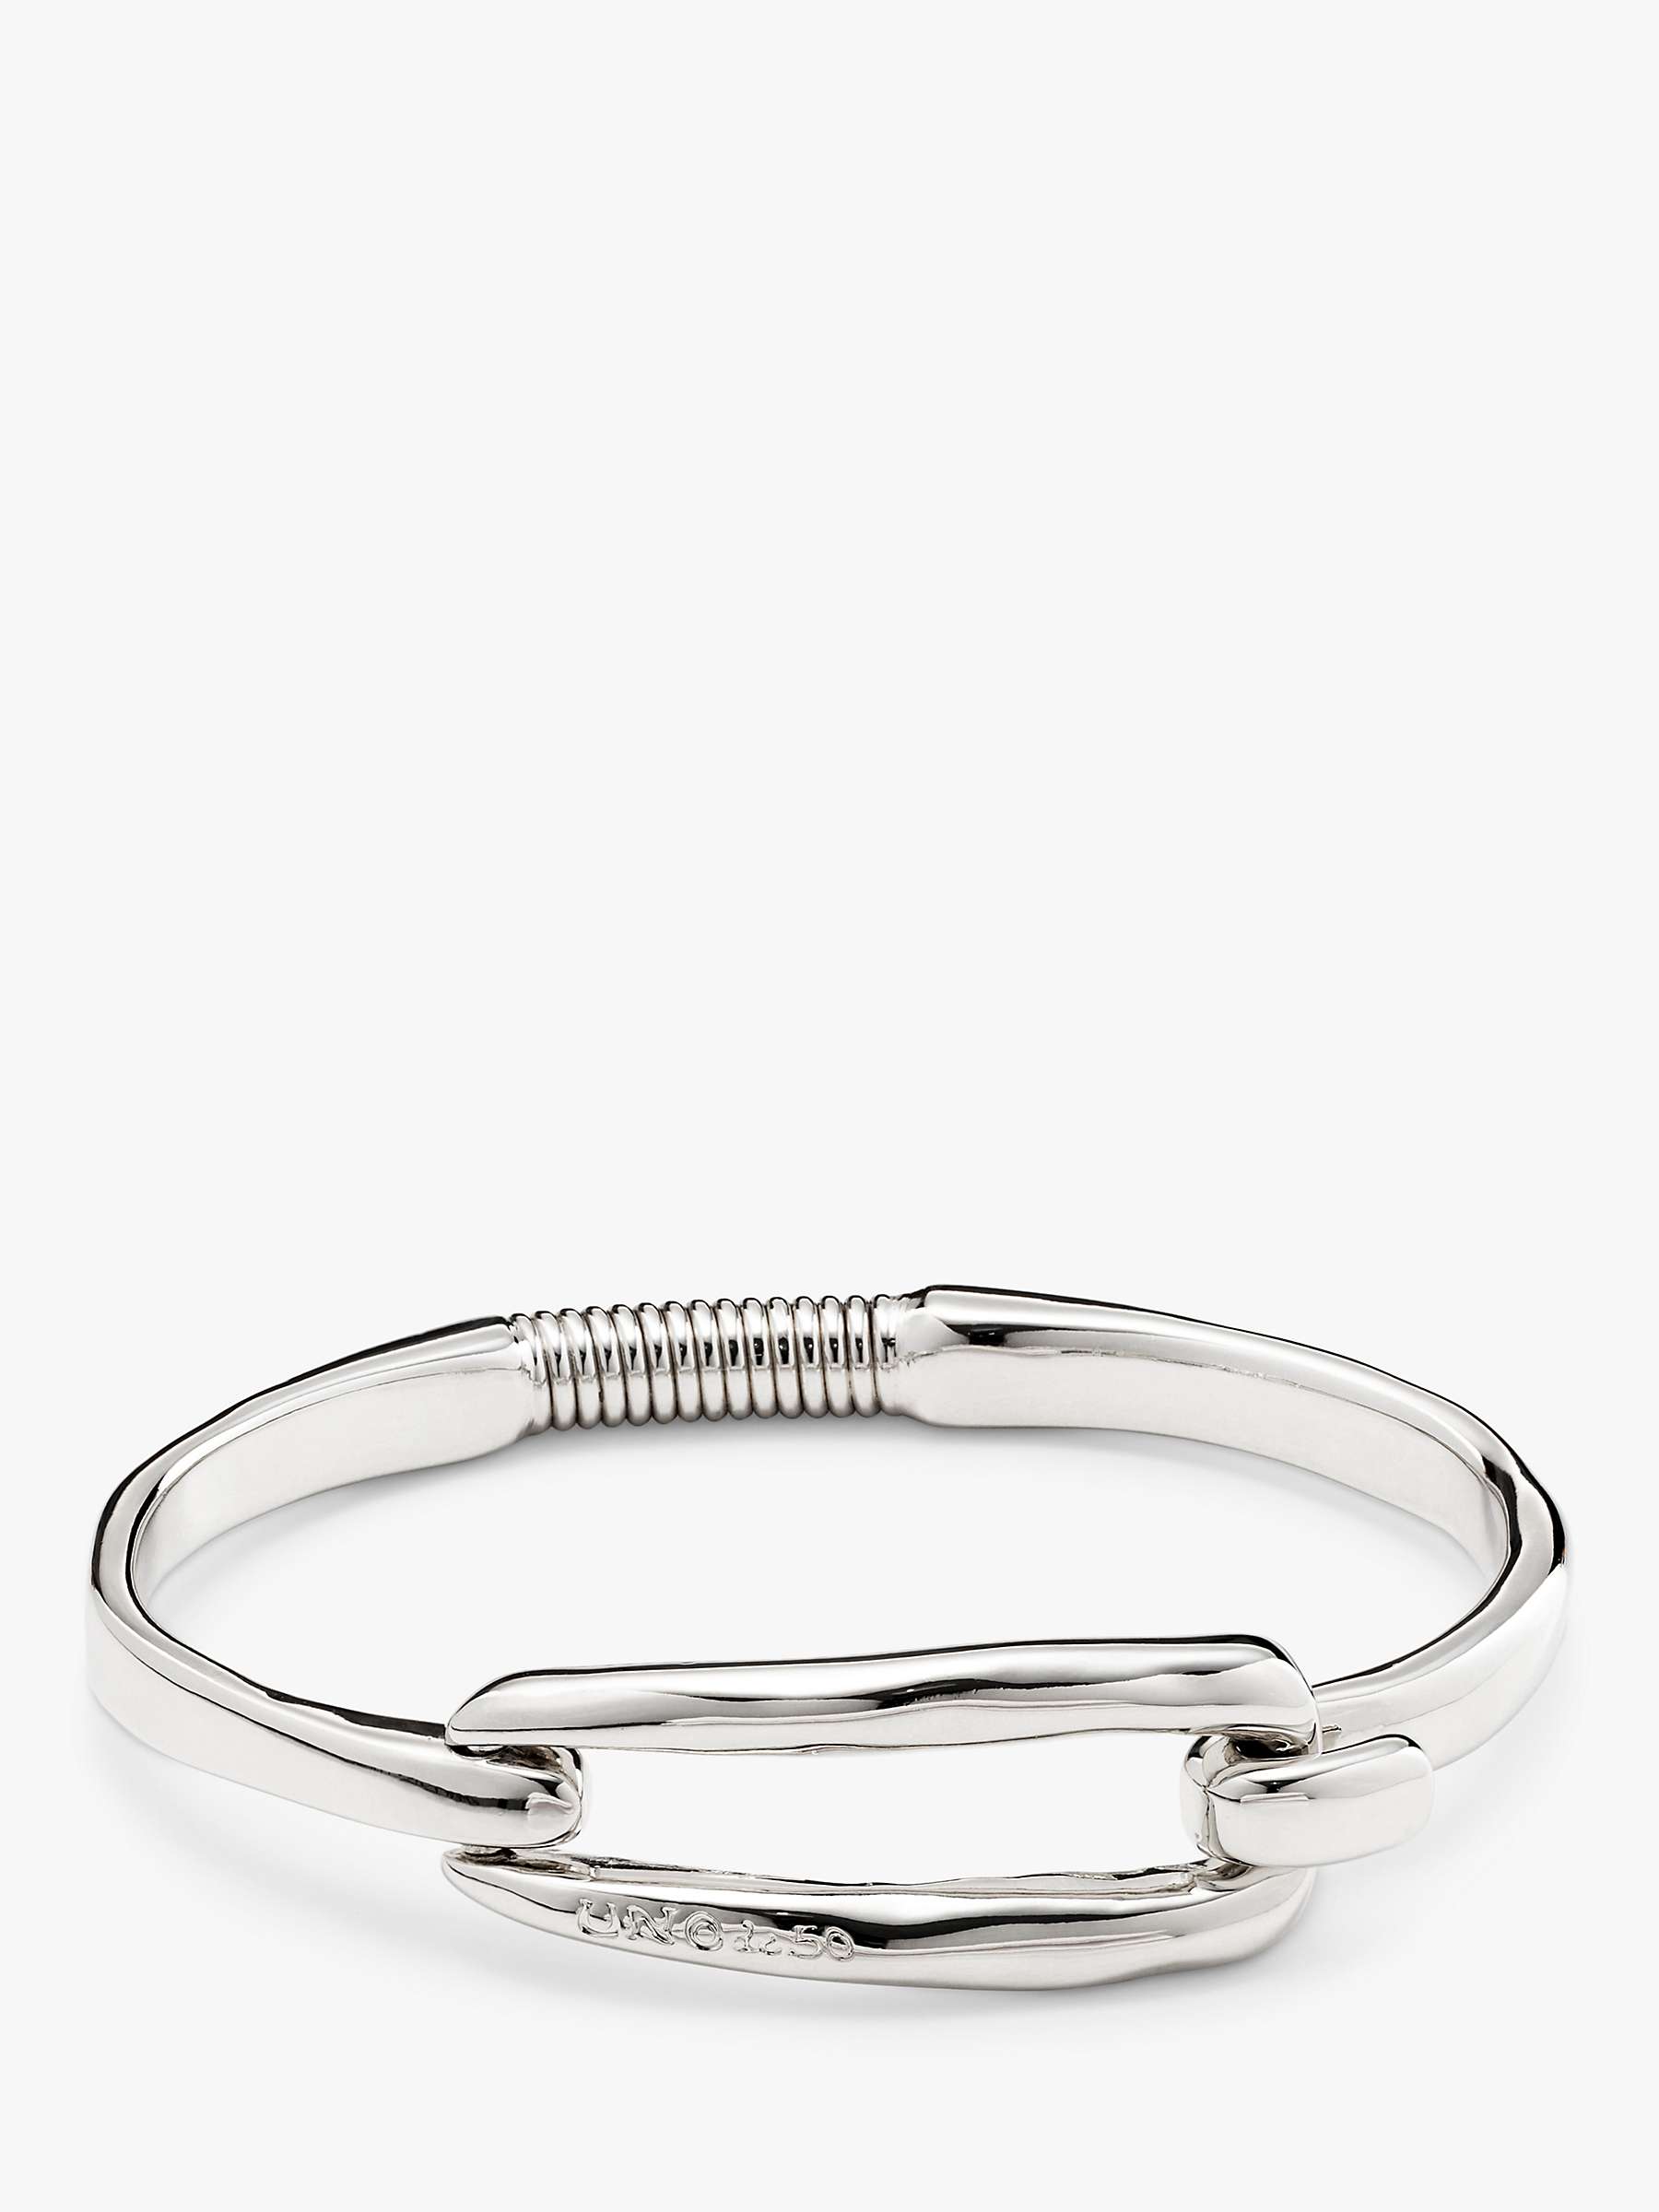 Buy UNOde50 Elongated Clasp Bangle, Silver Online at johnlewis.com